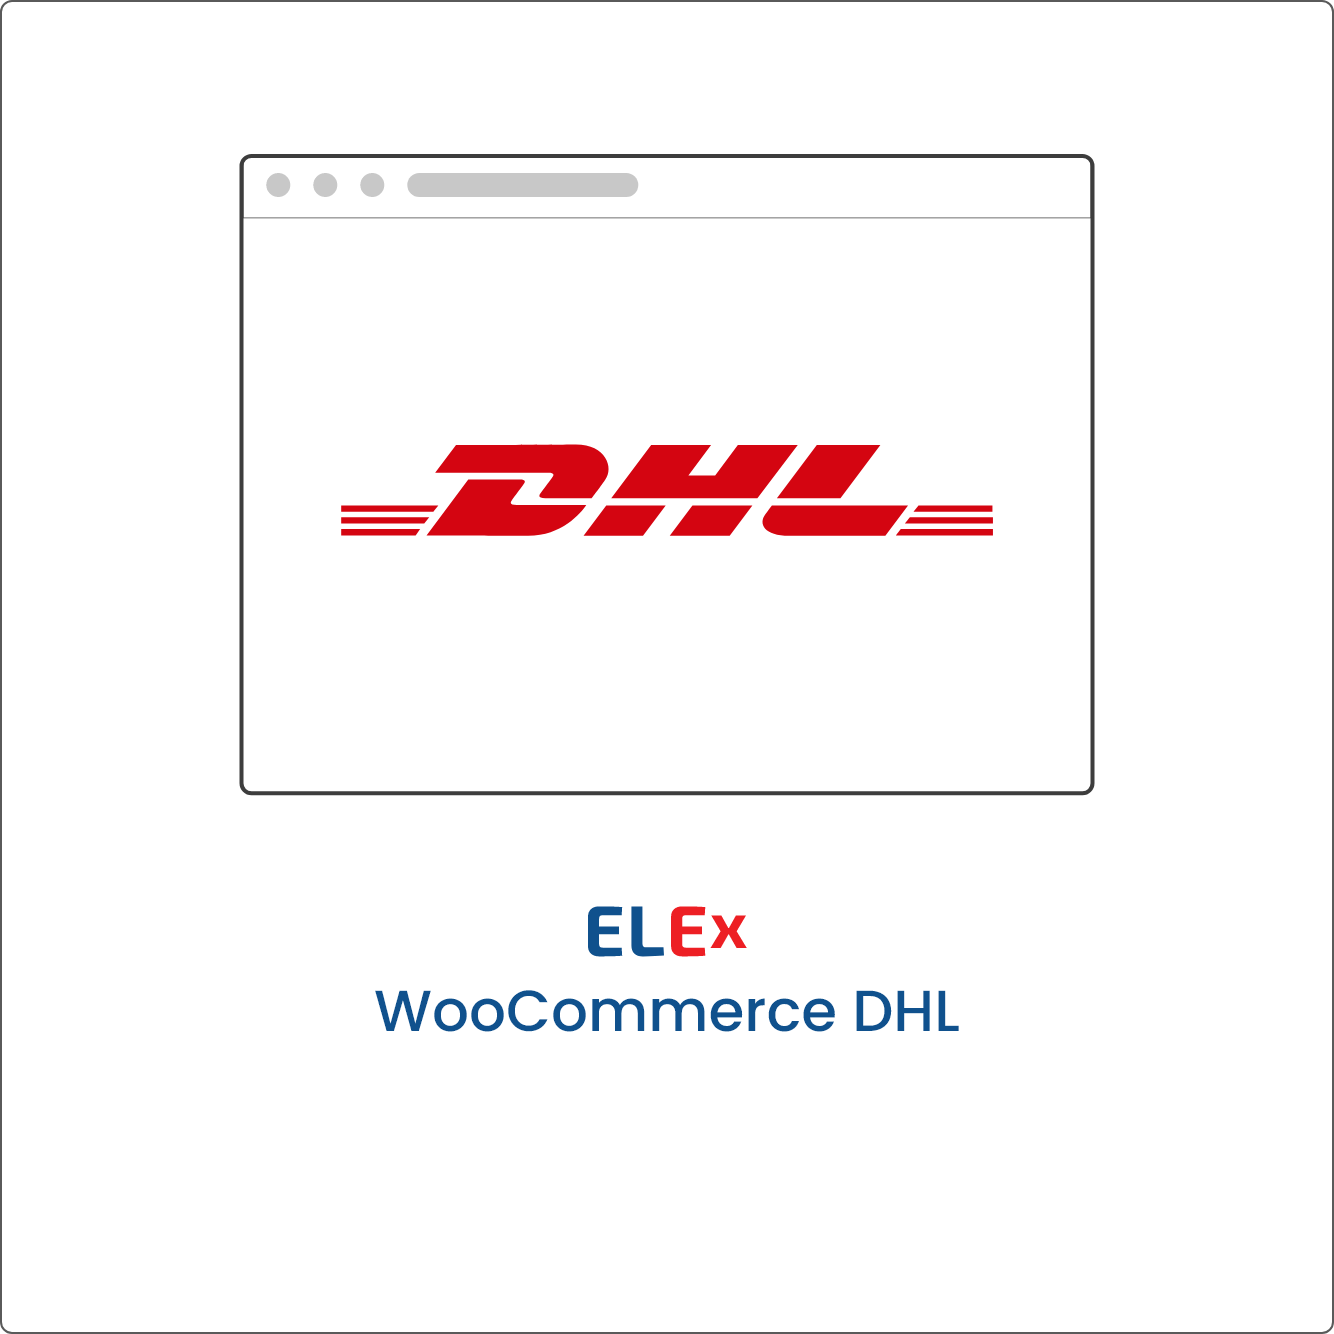 WooCommerce DHL Shipping for DHL Express, DHL Paket, and DHL eCommerce by ELEX